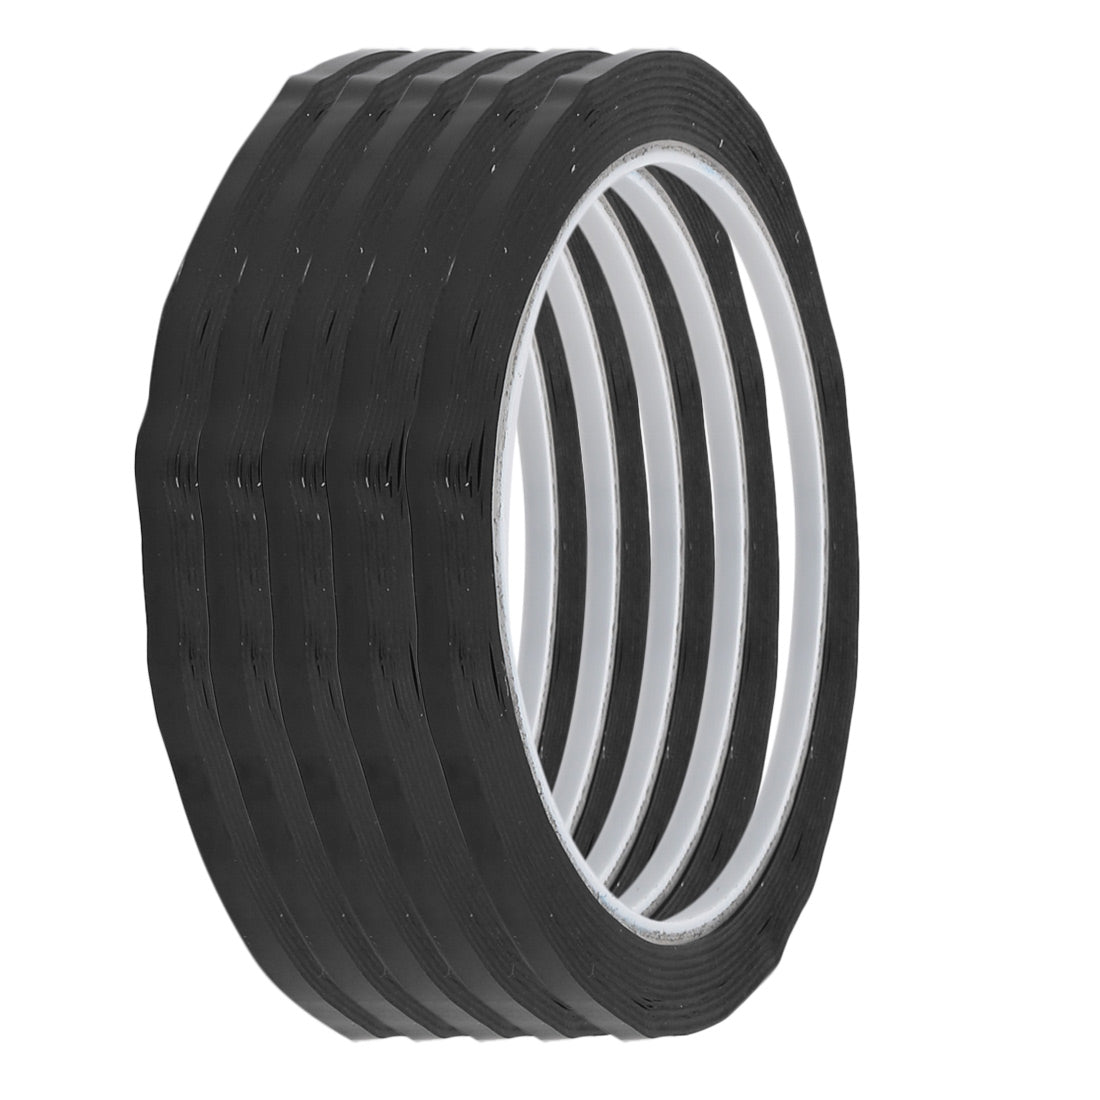 uxcell Uxcell 5pcs 3mm Width 164ft Length Single-side Electrical Insulated Adhesive Tape Black